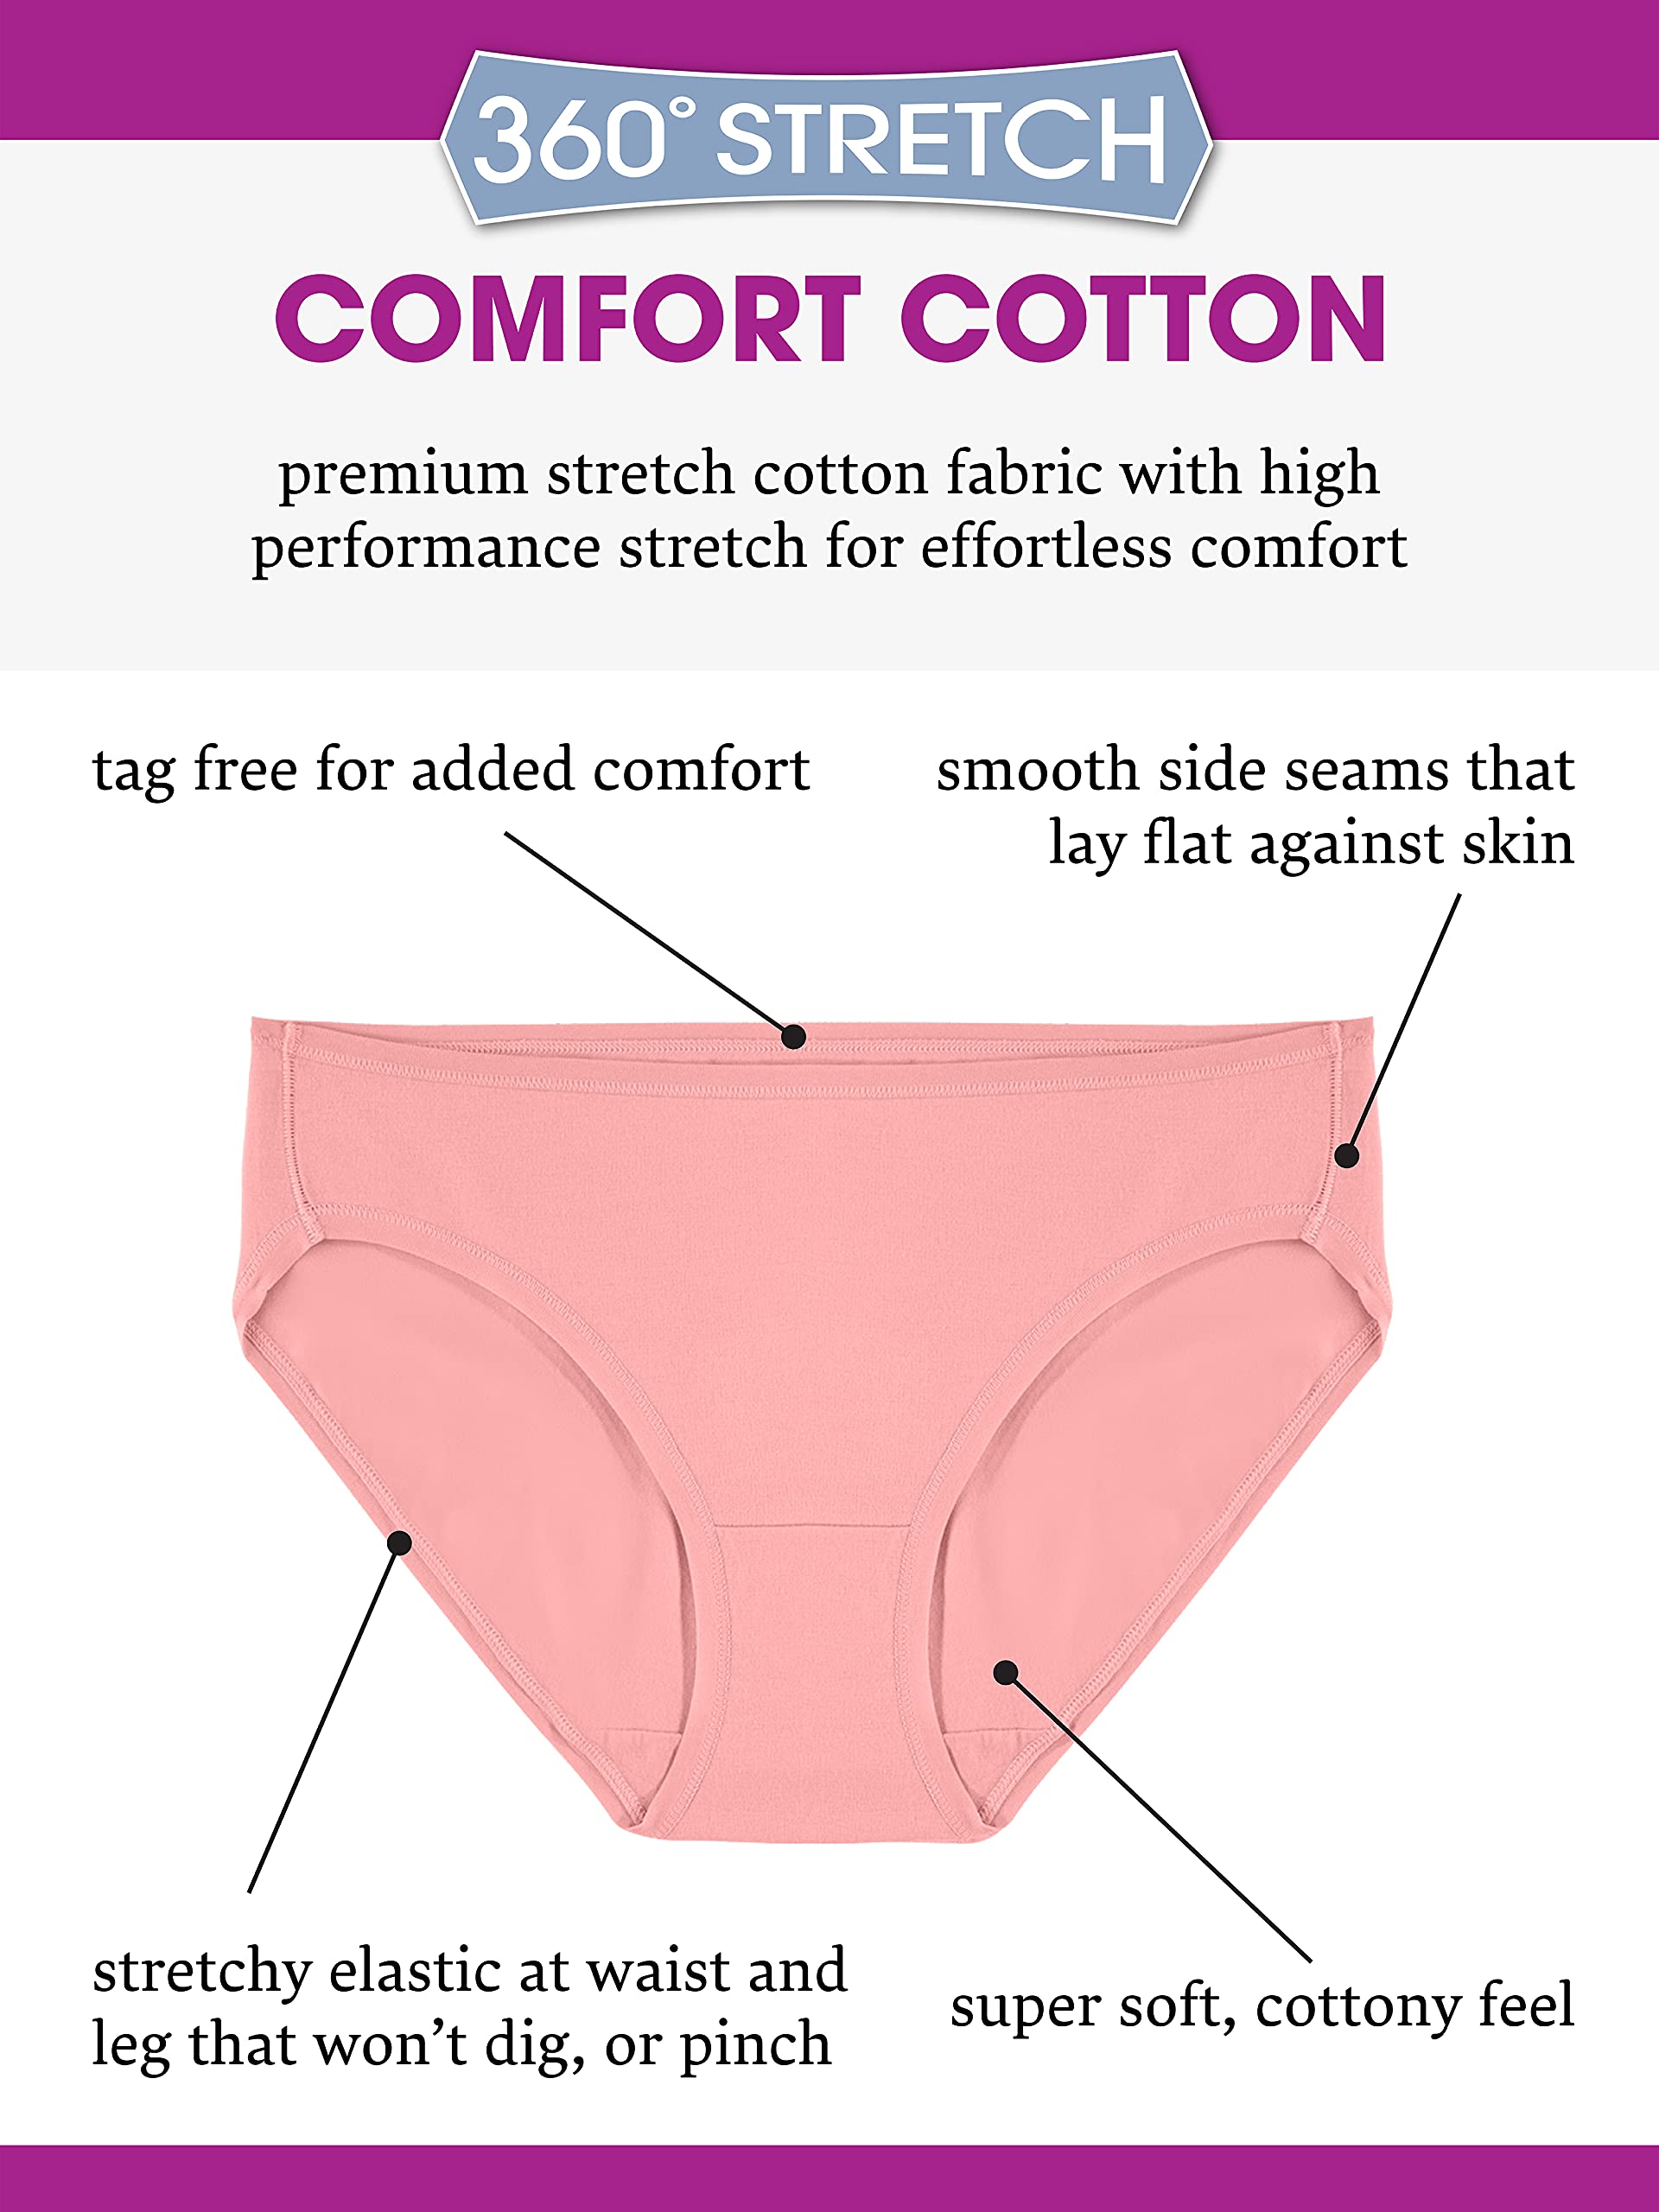 Fruit of the Loom Women's 360° Stretch Underwear, High Performance Stretch for Effortless Comfort, Available in Plus Size